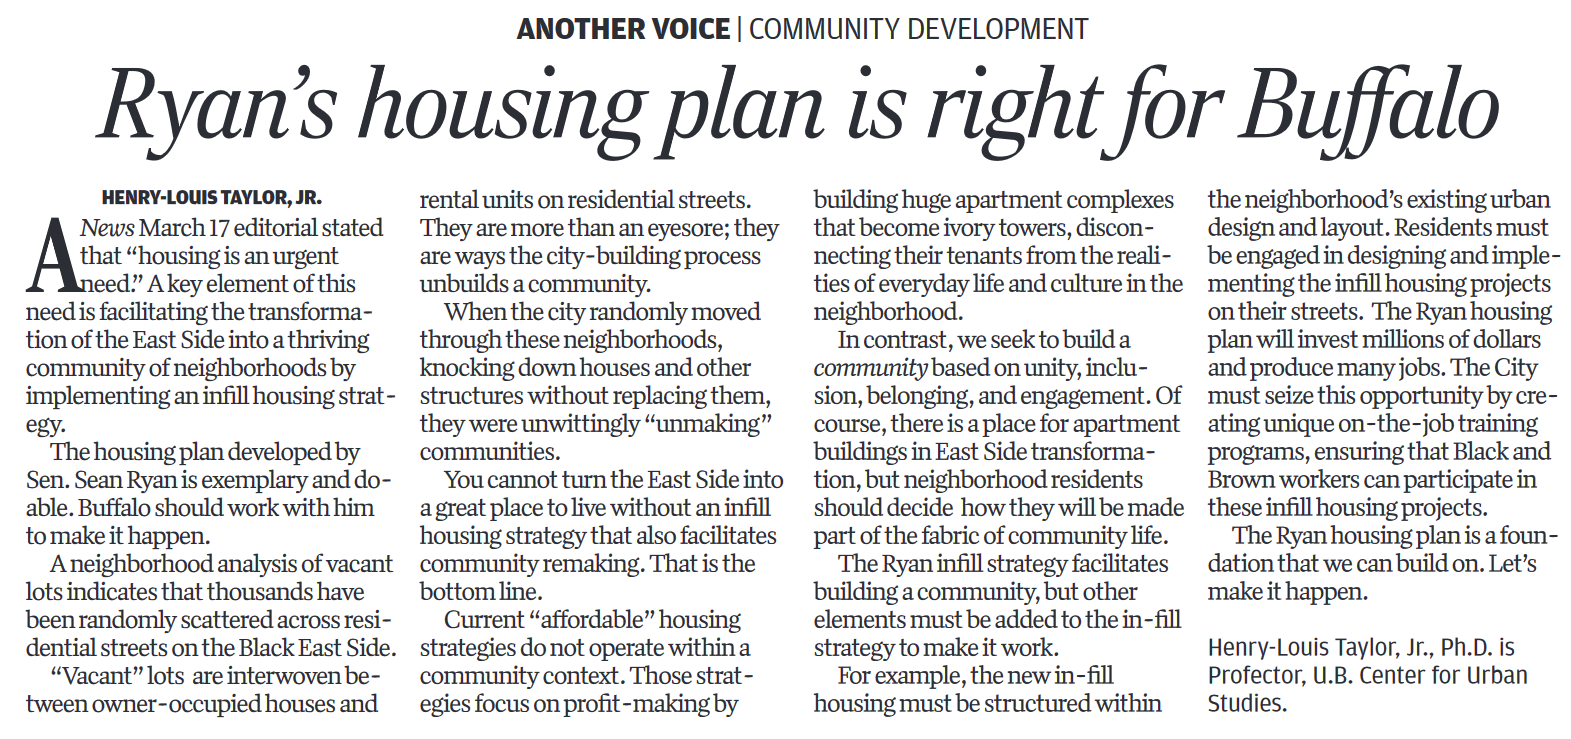   A News March 17 editorial stated that "housing is an urgent need." A key element of this need is facilitating the transformation of the East Side into a thriving community of neighborhoods by implementing an infill housing strategy.  The housing plan developed by Sen. Sean Ryan is exemplary and doable. Buffalo should work with him to make it happen.  A neighborhood analysis of vacant lots indicates that thousands have been randomly scattered across residential streets on the Black East Side.  "Vacant" lots are interwoven between owner-occupied houses and rental units on residential streets. They are more than an eyesore; they are ways the city-building process unbuilds a community.  When the city randomly moved through these neighborhoods, knocking down houses and other structures without replacing them, they were unwittingly "unmaking" communities.  You cannot turn the East Side into a great place to live without an infill housing strategy that also facilitates community remaking. That is the bottom line.  Current "affordable" housing strategies do not operate within a community context. Those strategies focus on profit-making by building huge apartment complexes that become ivory towers, disconnecting their tenants from the realities of everyday life and culture in the neighborhood.  In contrast, we seek to build a community based on unity, inclusion, belonging, and engagement. Of course, there is a place for apartment buildings in East Side transformation, but neighborhood residents should decide how they will be made part of the fabric of community life.  The Ryan infill strategy facilitates building a community, but other elements must be added to the in-fill strategy to make it work.  For example, the new in-fill housing must be structured within the neighborhood's existing urban design and layout. Residents must be engaged in designing and implementing the infill housing projects on their streets. The Ryan housing plan will invest millions of dollars and produce many jobs. The City must seize this opportunity by creating unique on-the-job training programs, ensuring that Black and Brown workers can participate in these infill housing projects.  The Ryan housing plan is a foundation that we can build on. Let's make it happen.  Henry-Louis Taylor, Jr., Ph.D. is Professor, U.B. Center for Urban Studies.